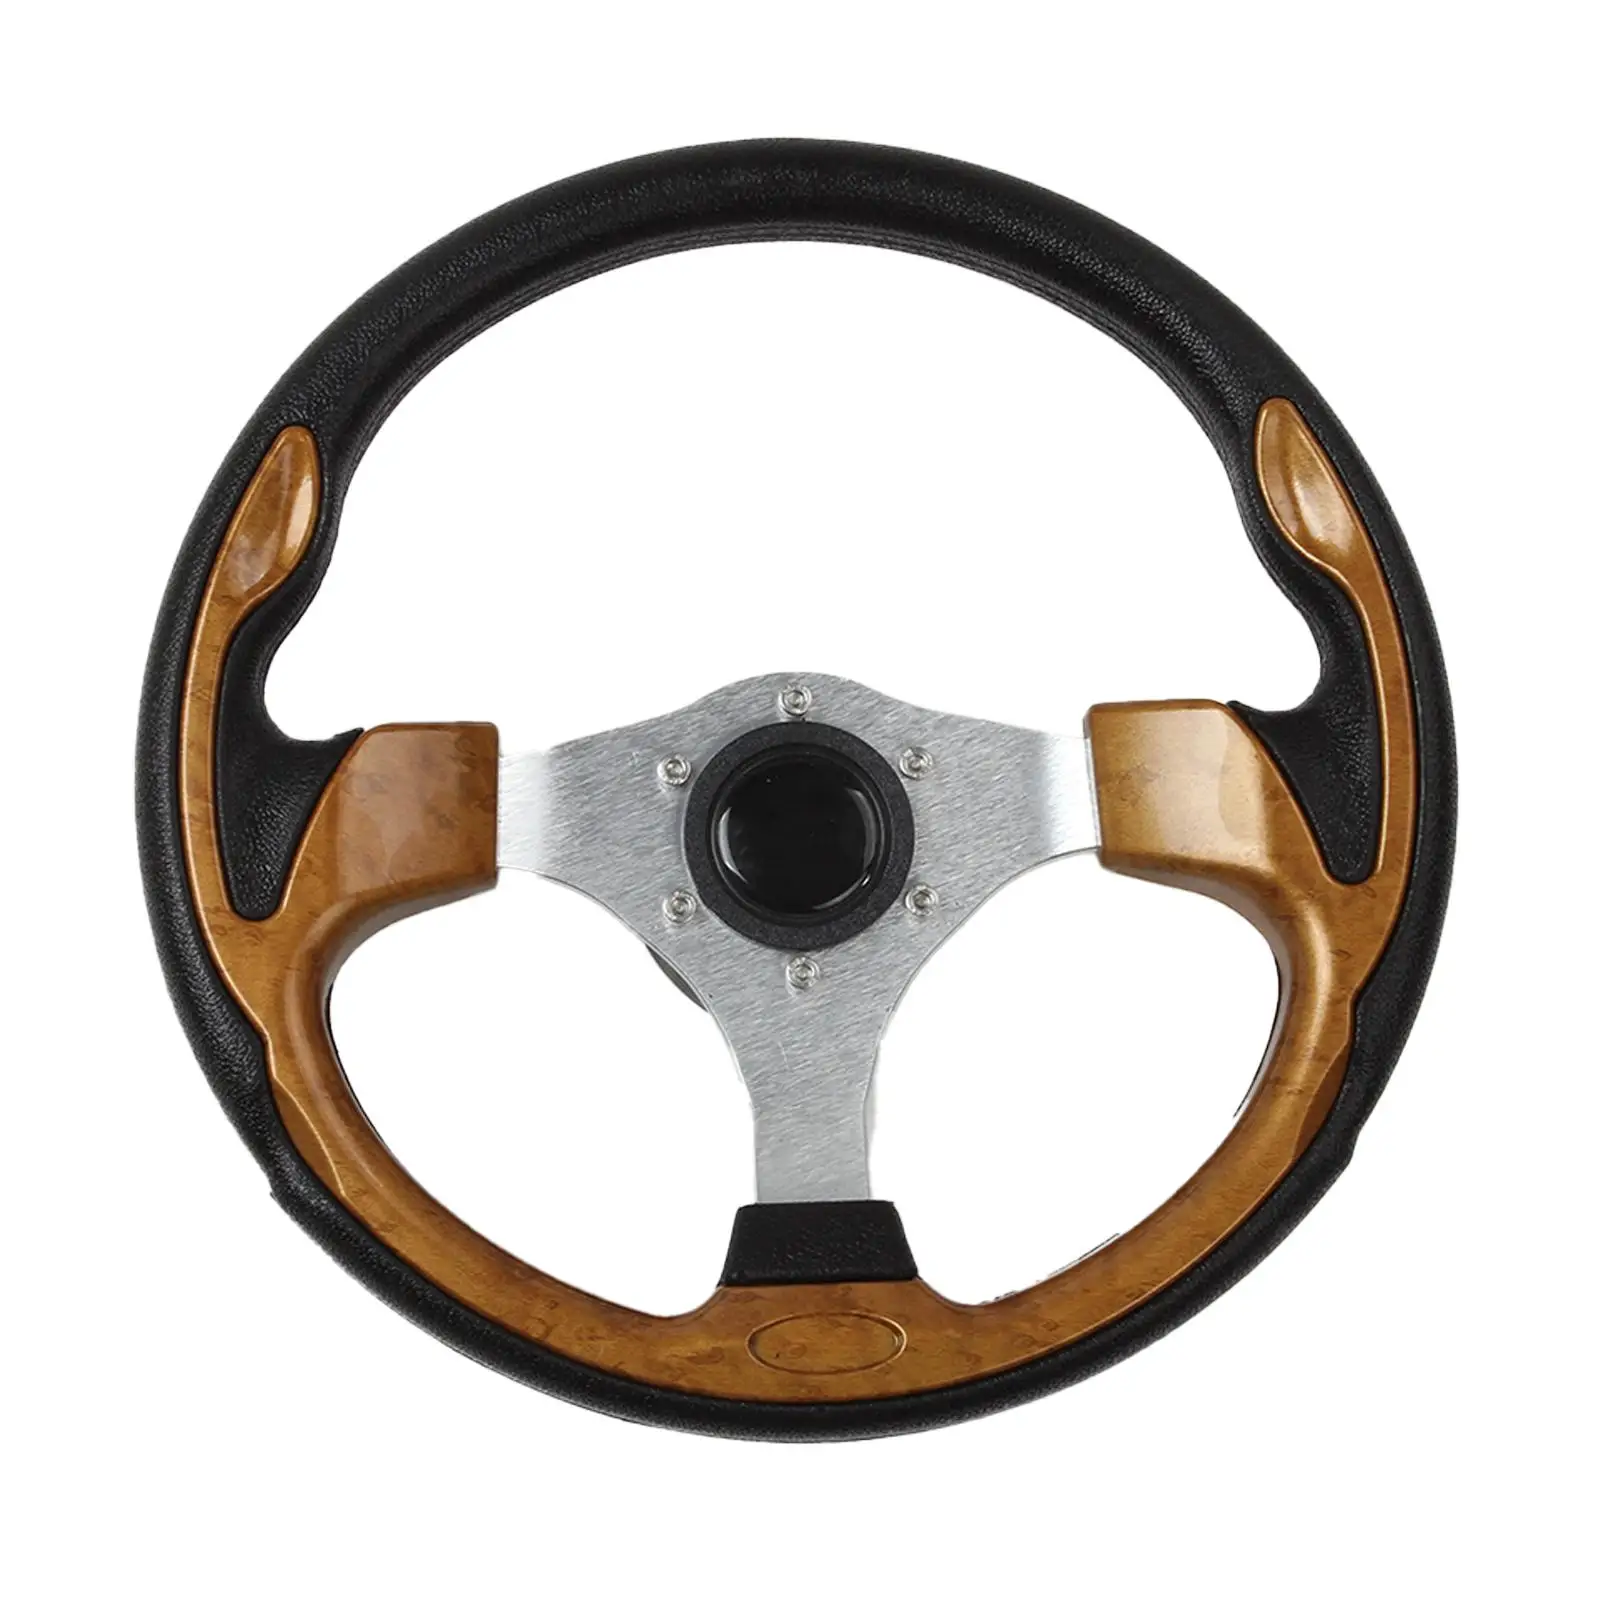 Marine Boat Steering Wheel Convenient Assemble AntiSlip Accessory 3 Spokes for Vessels Marine Boats Pontoon Boats Devices